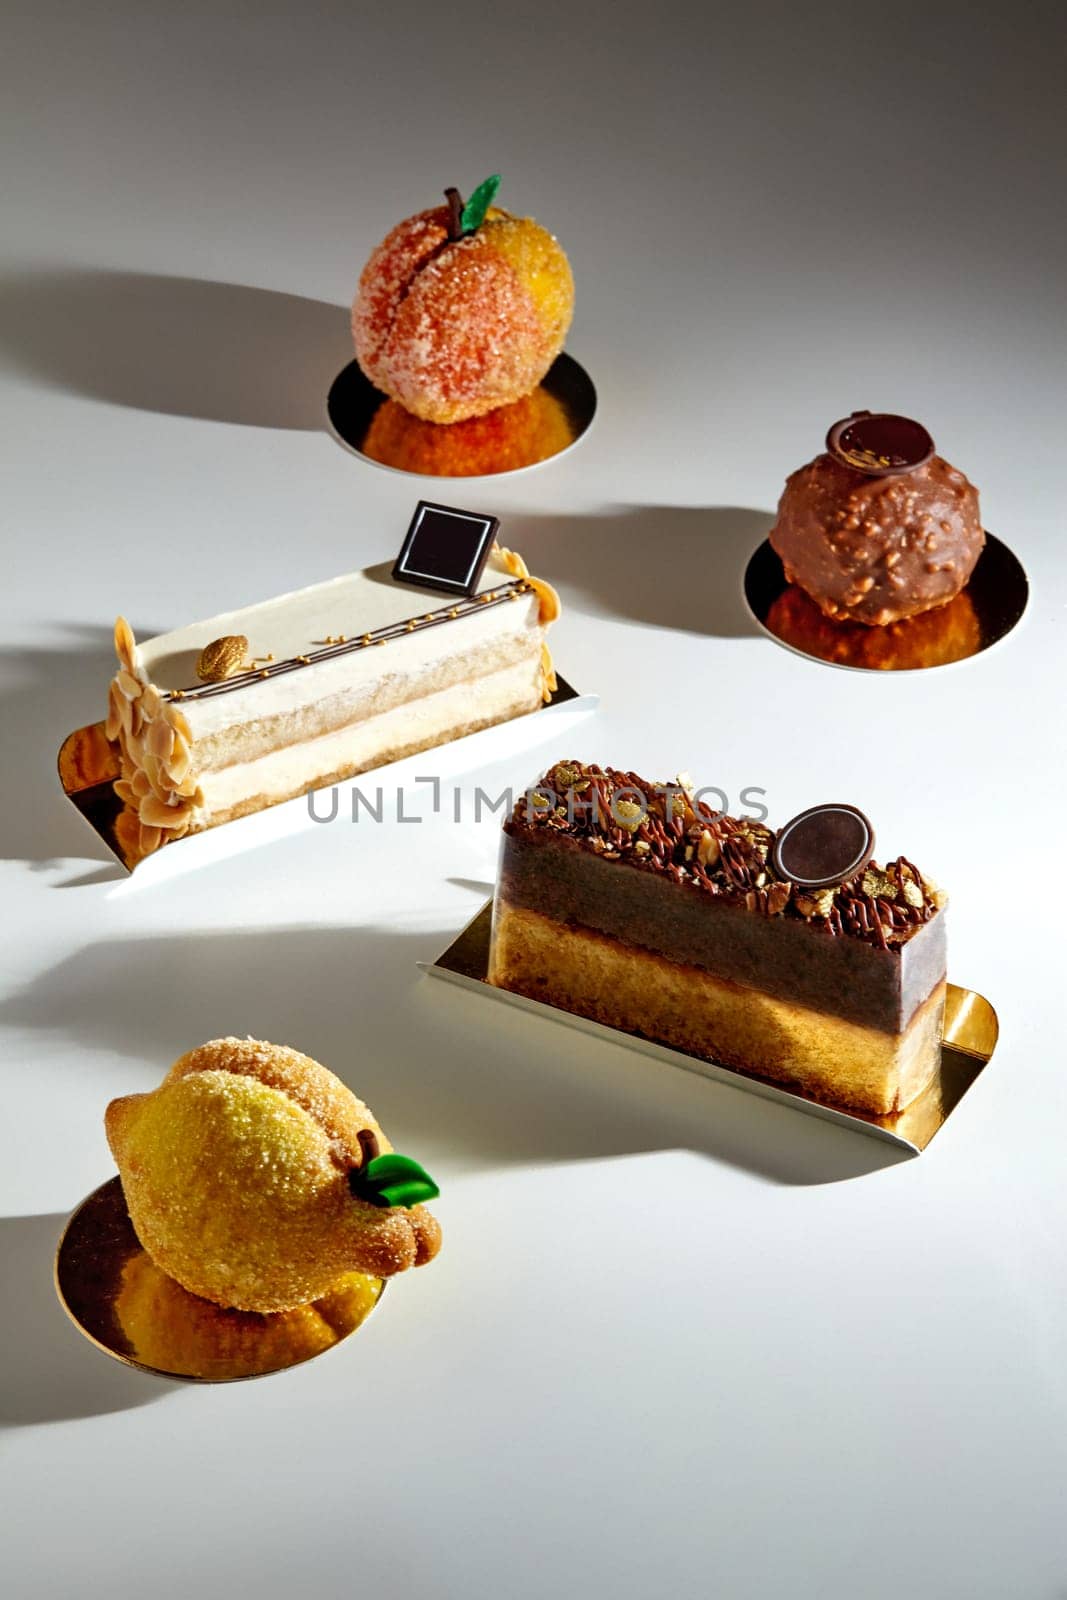 Variety of handcrafted desserts, velvety mousse and sponge layered cakes, crispy shortcrust pastries dusted with sugar in shape of fruits and chocolate praline truffle spotlighted on light surface